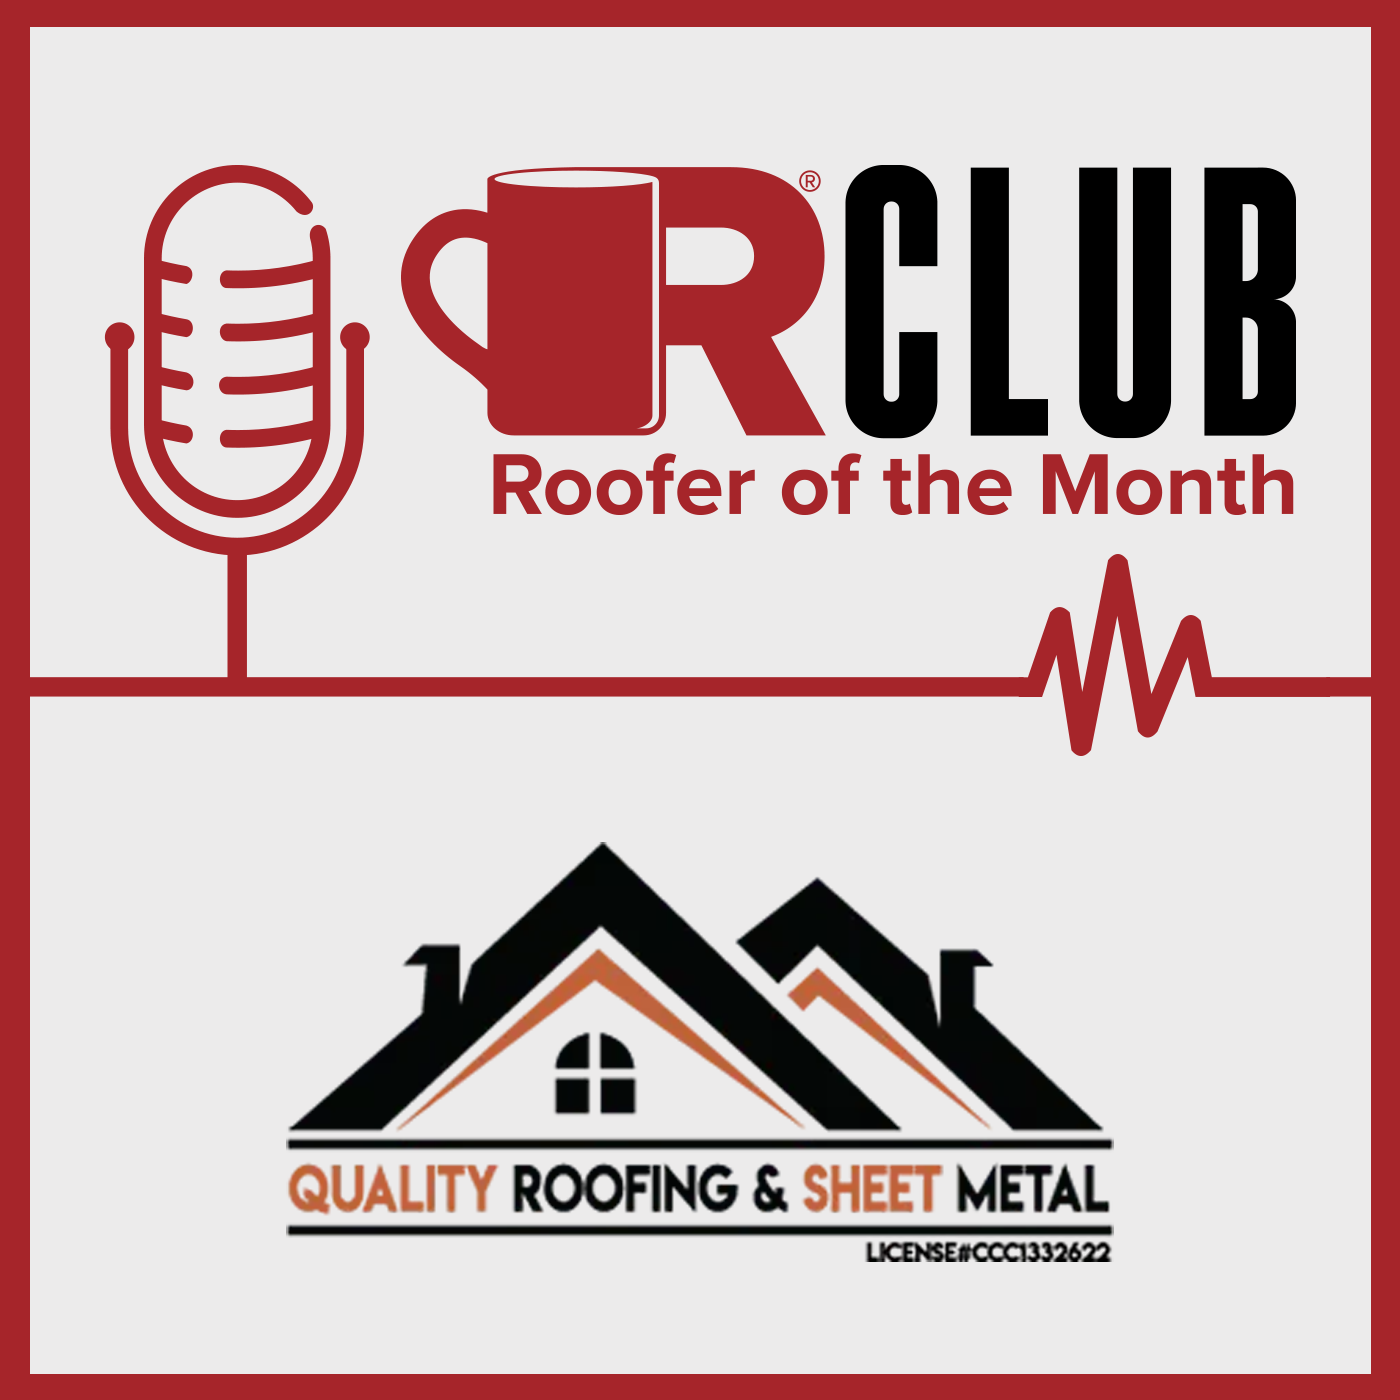 Quality Roofing & Sheet Metal - ROTM - JULY 2022